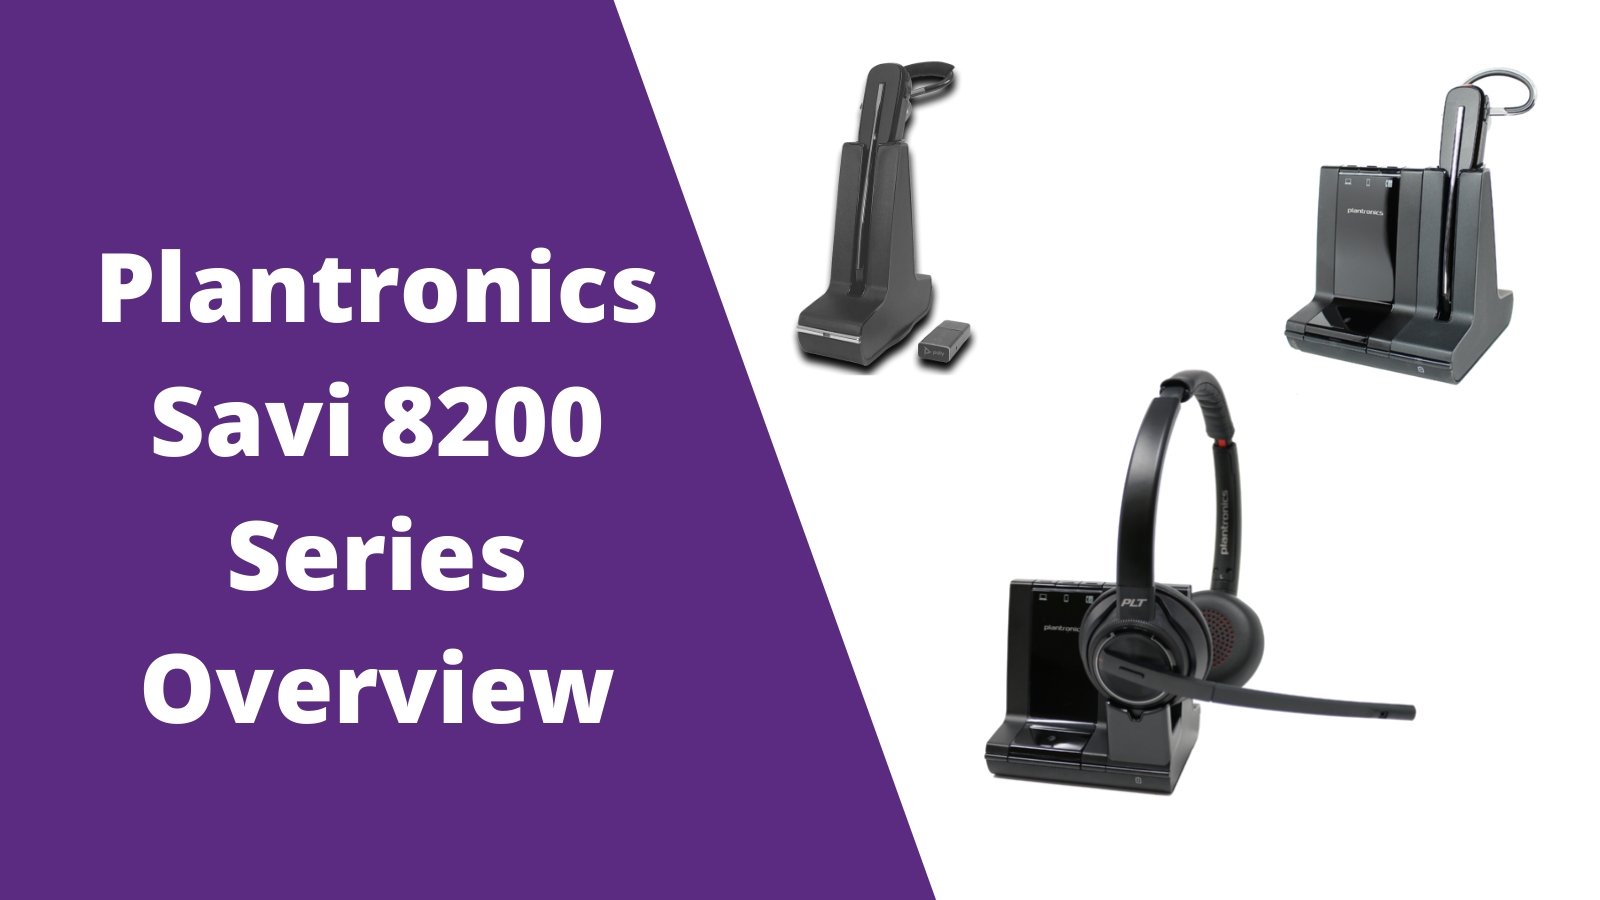 Plantronics Savi 8200 Series Overview- You'll Want To Read This Before Making A Decision - Headset Advisor